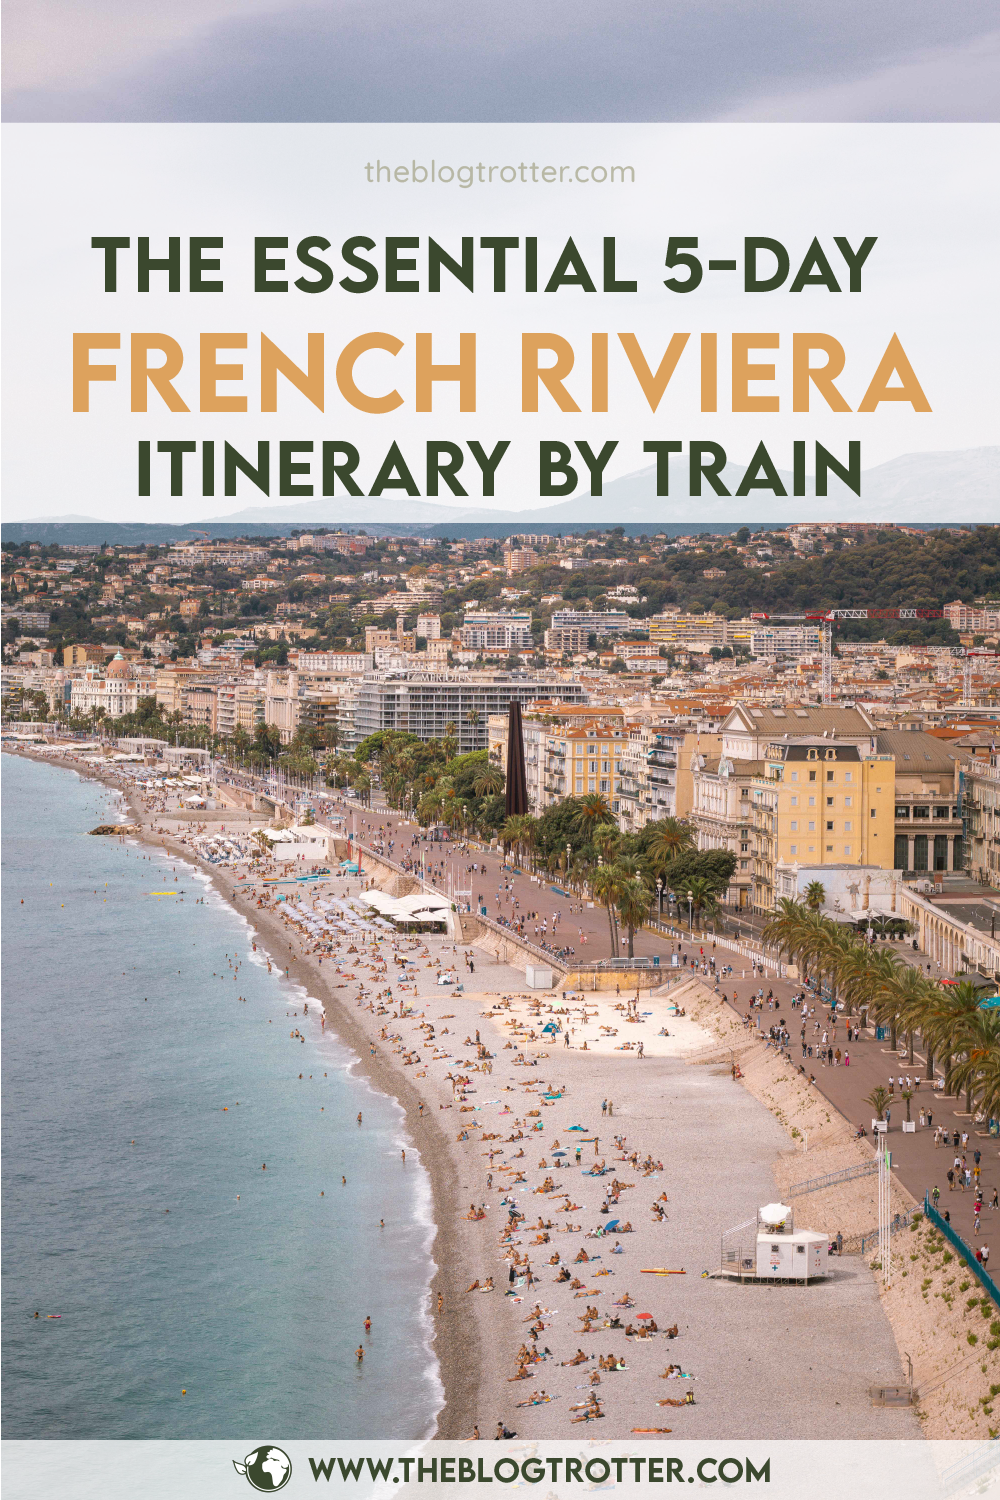 French riviera itinerary article visual for Pinterest - Option 1